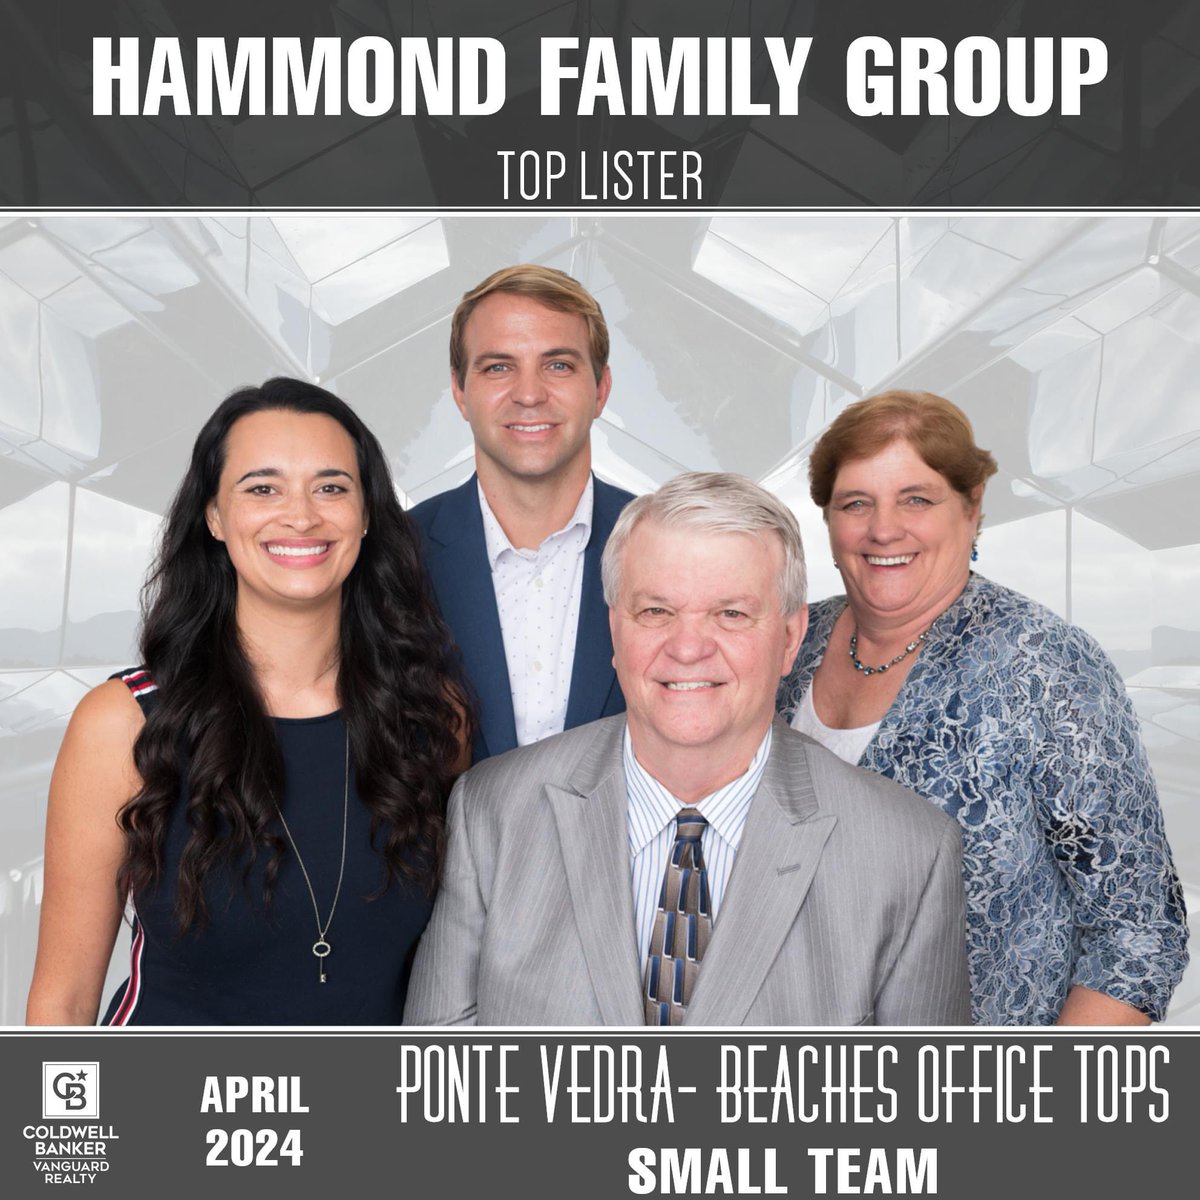 April was another successful month for the @HammondFamilyRE. Thanks as always to our friends/clients for your continued support!

#hammondfamilygroup #realestate #topproducers #toplisters #northeastflorida #florida